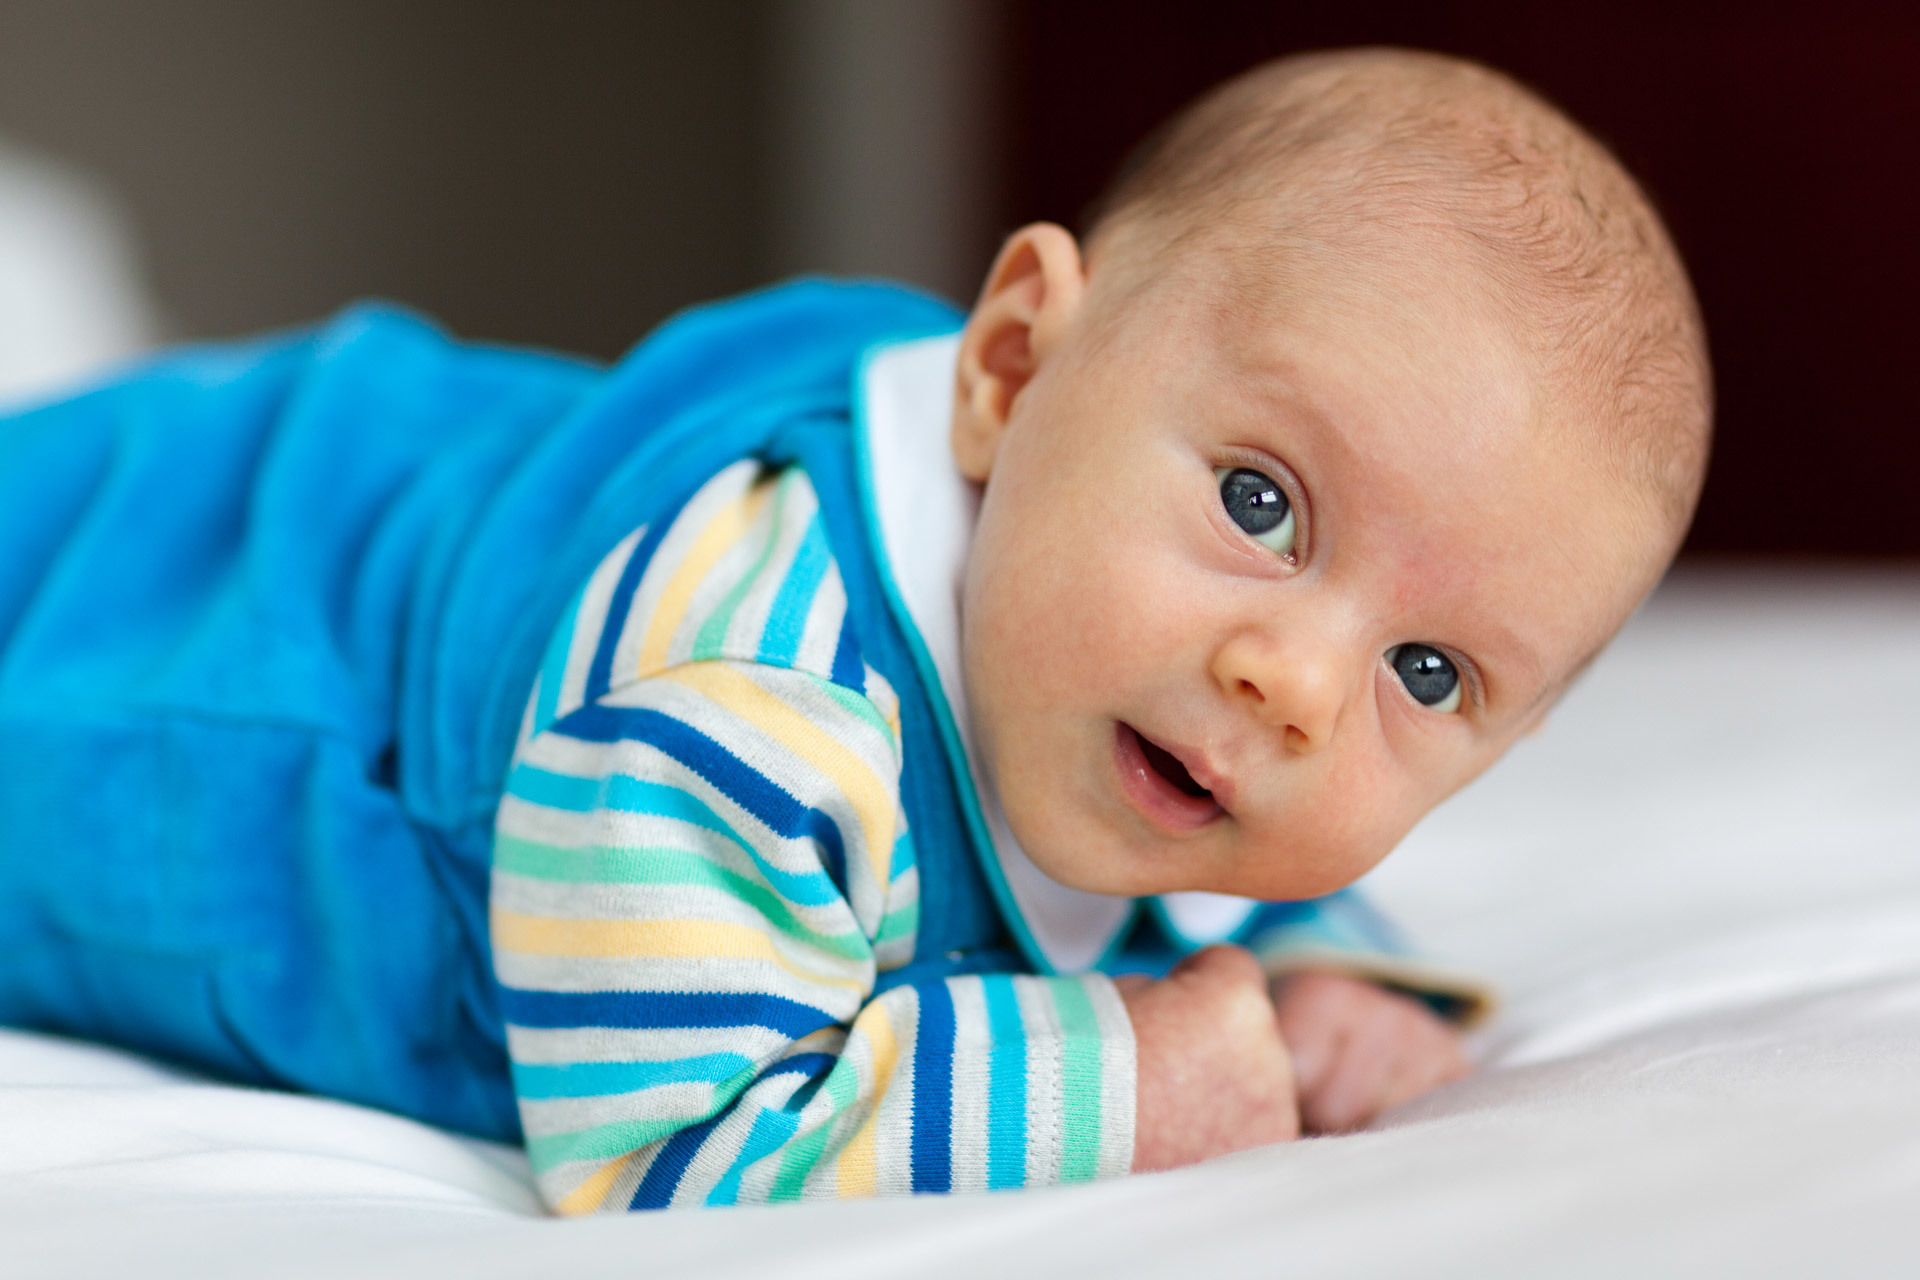 The most popular baby names revealed